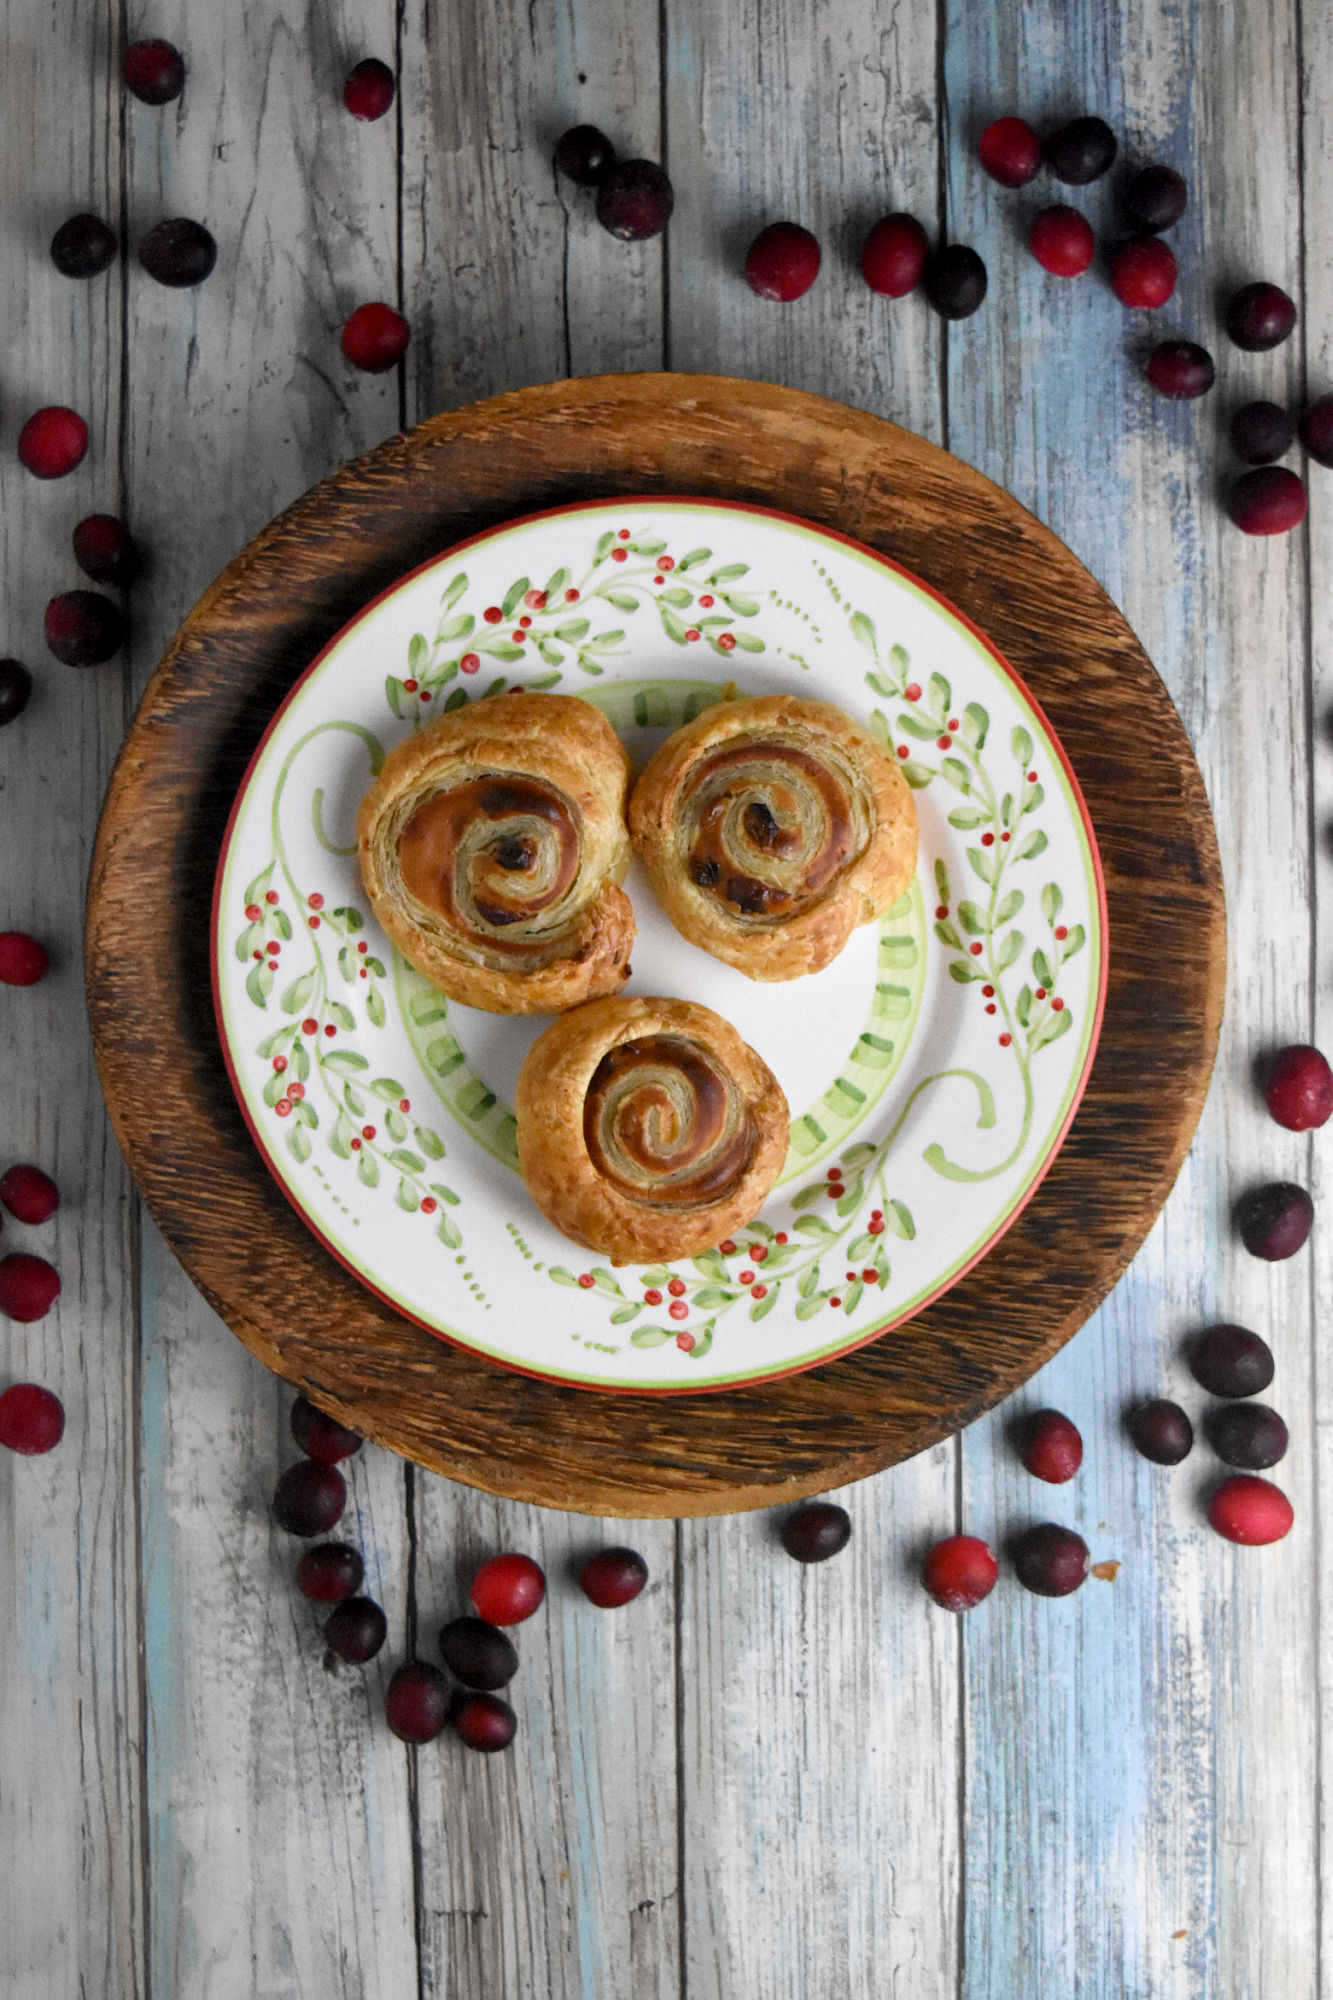 Cranberry Cream Cheese Pinwheels are super simple to make but they taste oh so delicious.  With just a few ingredients, and some leftover cranberry sauce, you can have a fun and tasty appetizer. #CranberryWeek #cranberry #puffpastry #cranberrysauce #easyrecipe